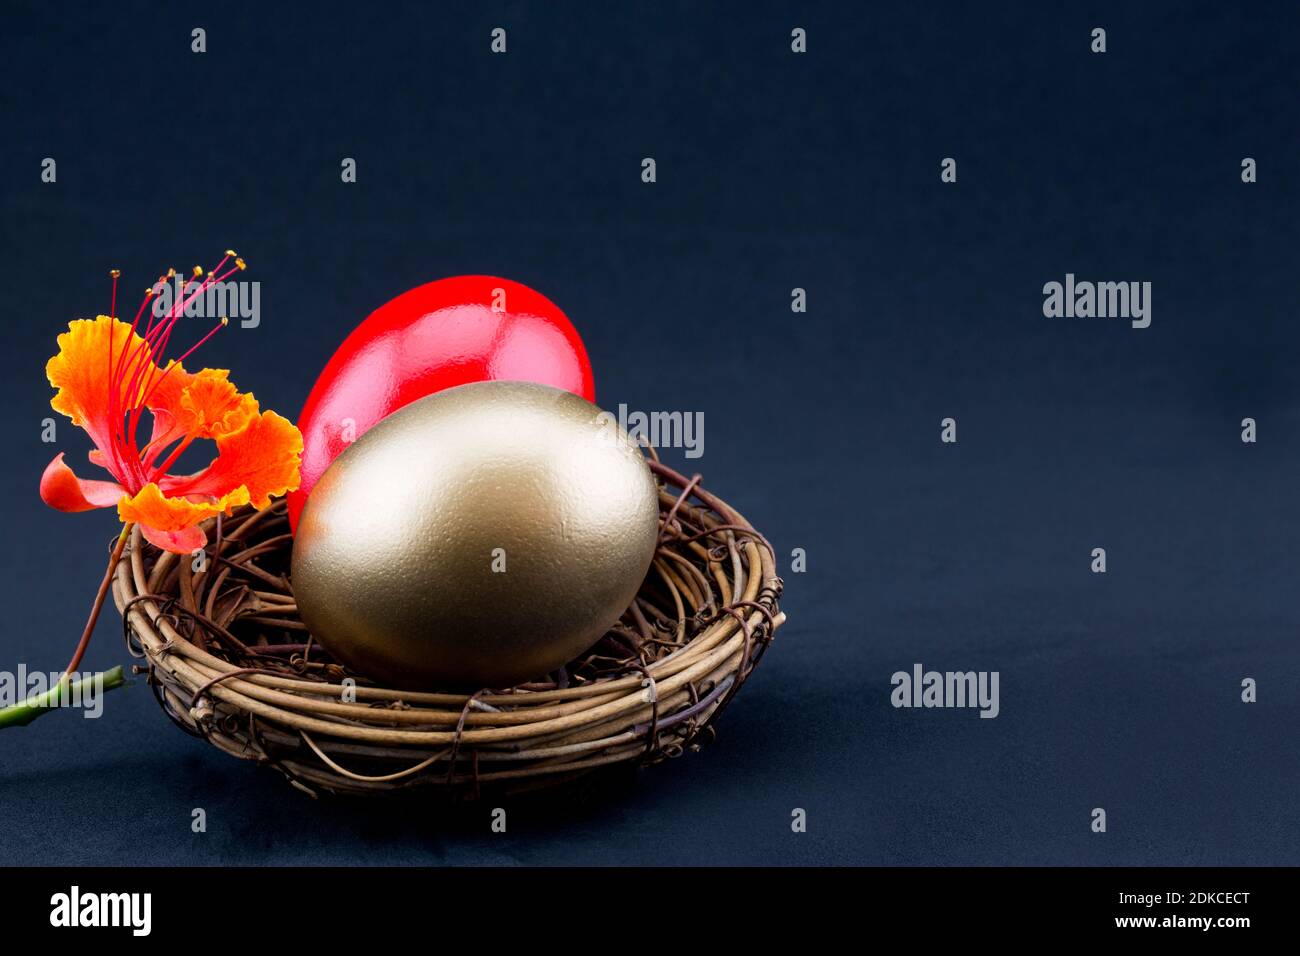 Business investment concepts seen in red and gold nest eggs accented by Red Bird of Paradise flower, all on black background with copy space on right. Stock Photo